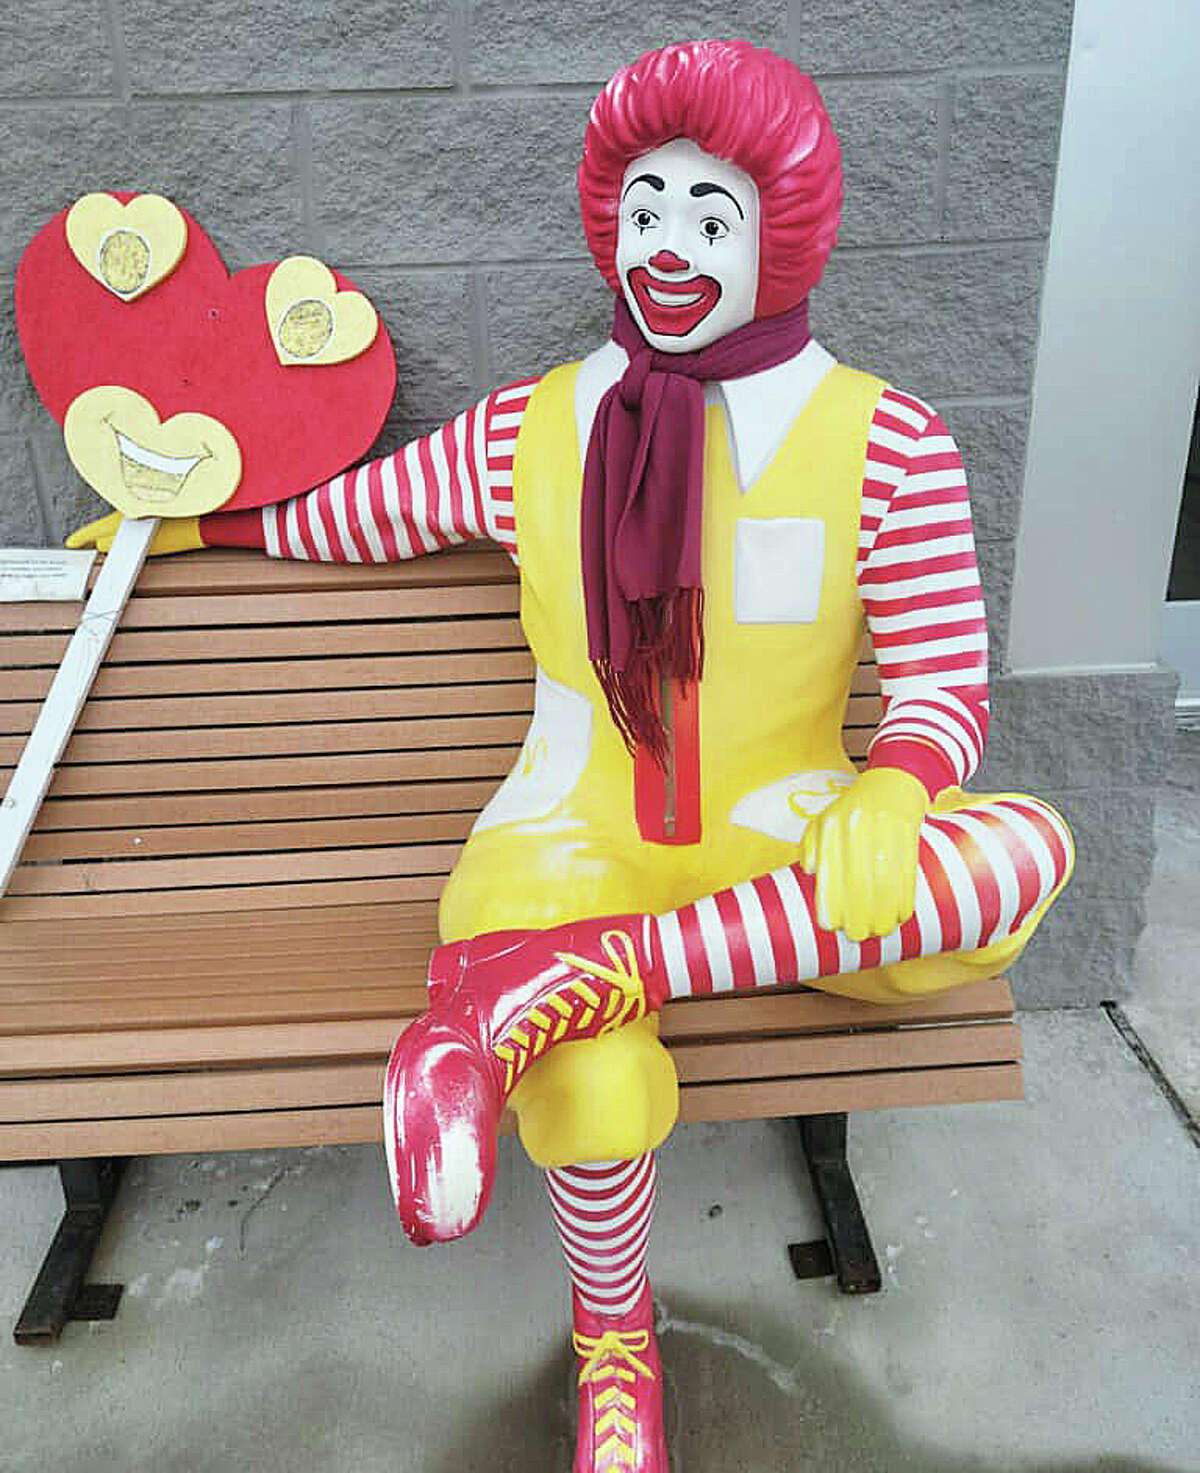 Bad Axe police are looking for two men who reportedly took the Ronald McDonald statue, like the one seen in this photo, from behind the Bad Axe McDonalds early Sunday.